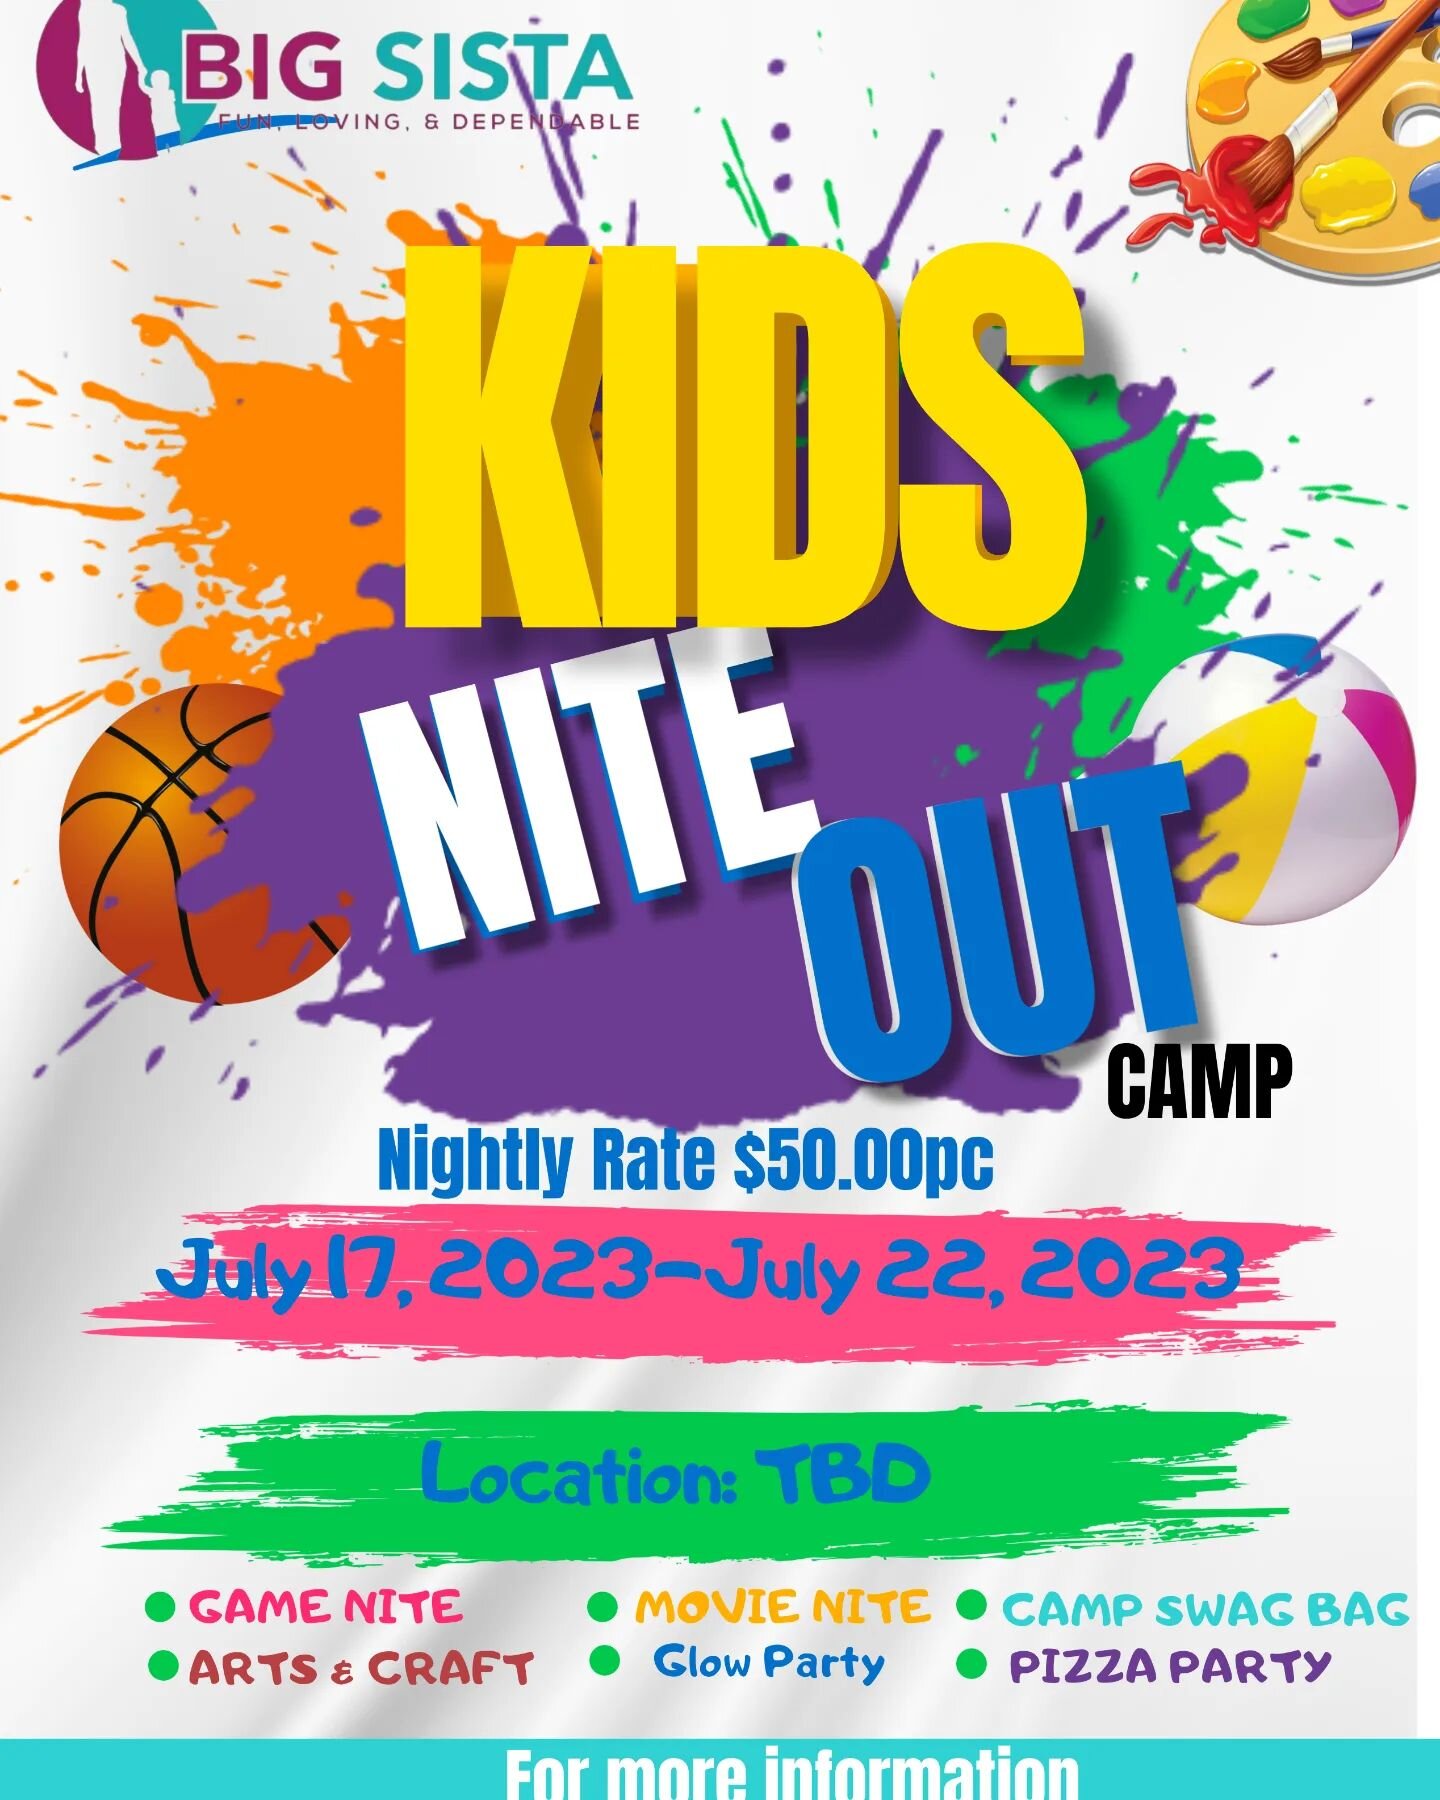 Big Sista Sitting Services is Host our 1st Summer Camp
In Tampa Fl!!! 

KIDS NITE OUT!!
JULY 17-22, 2023
5PM UNTIL 10PM
Location TBD
ONLY $50pc 

Register Today

Family Application 
https://forms.gle/xcGqEroLi2EbaQzz6

Space is LIMITED ‼️

For more i